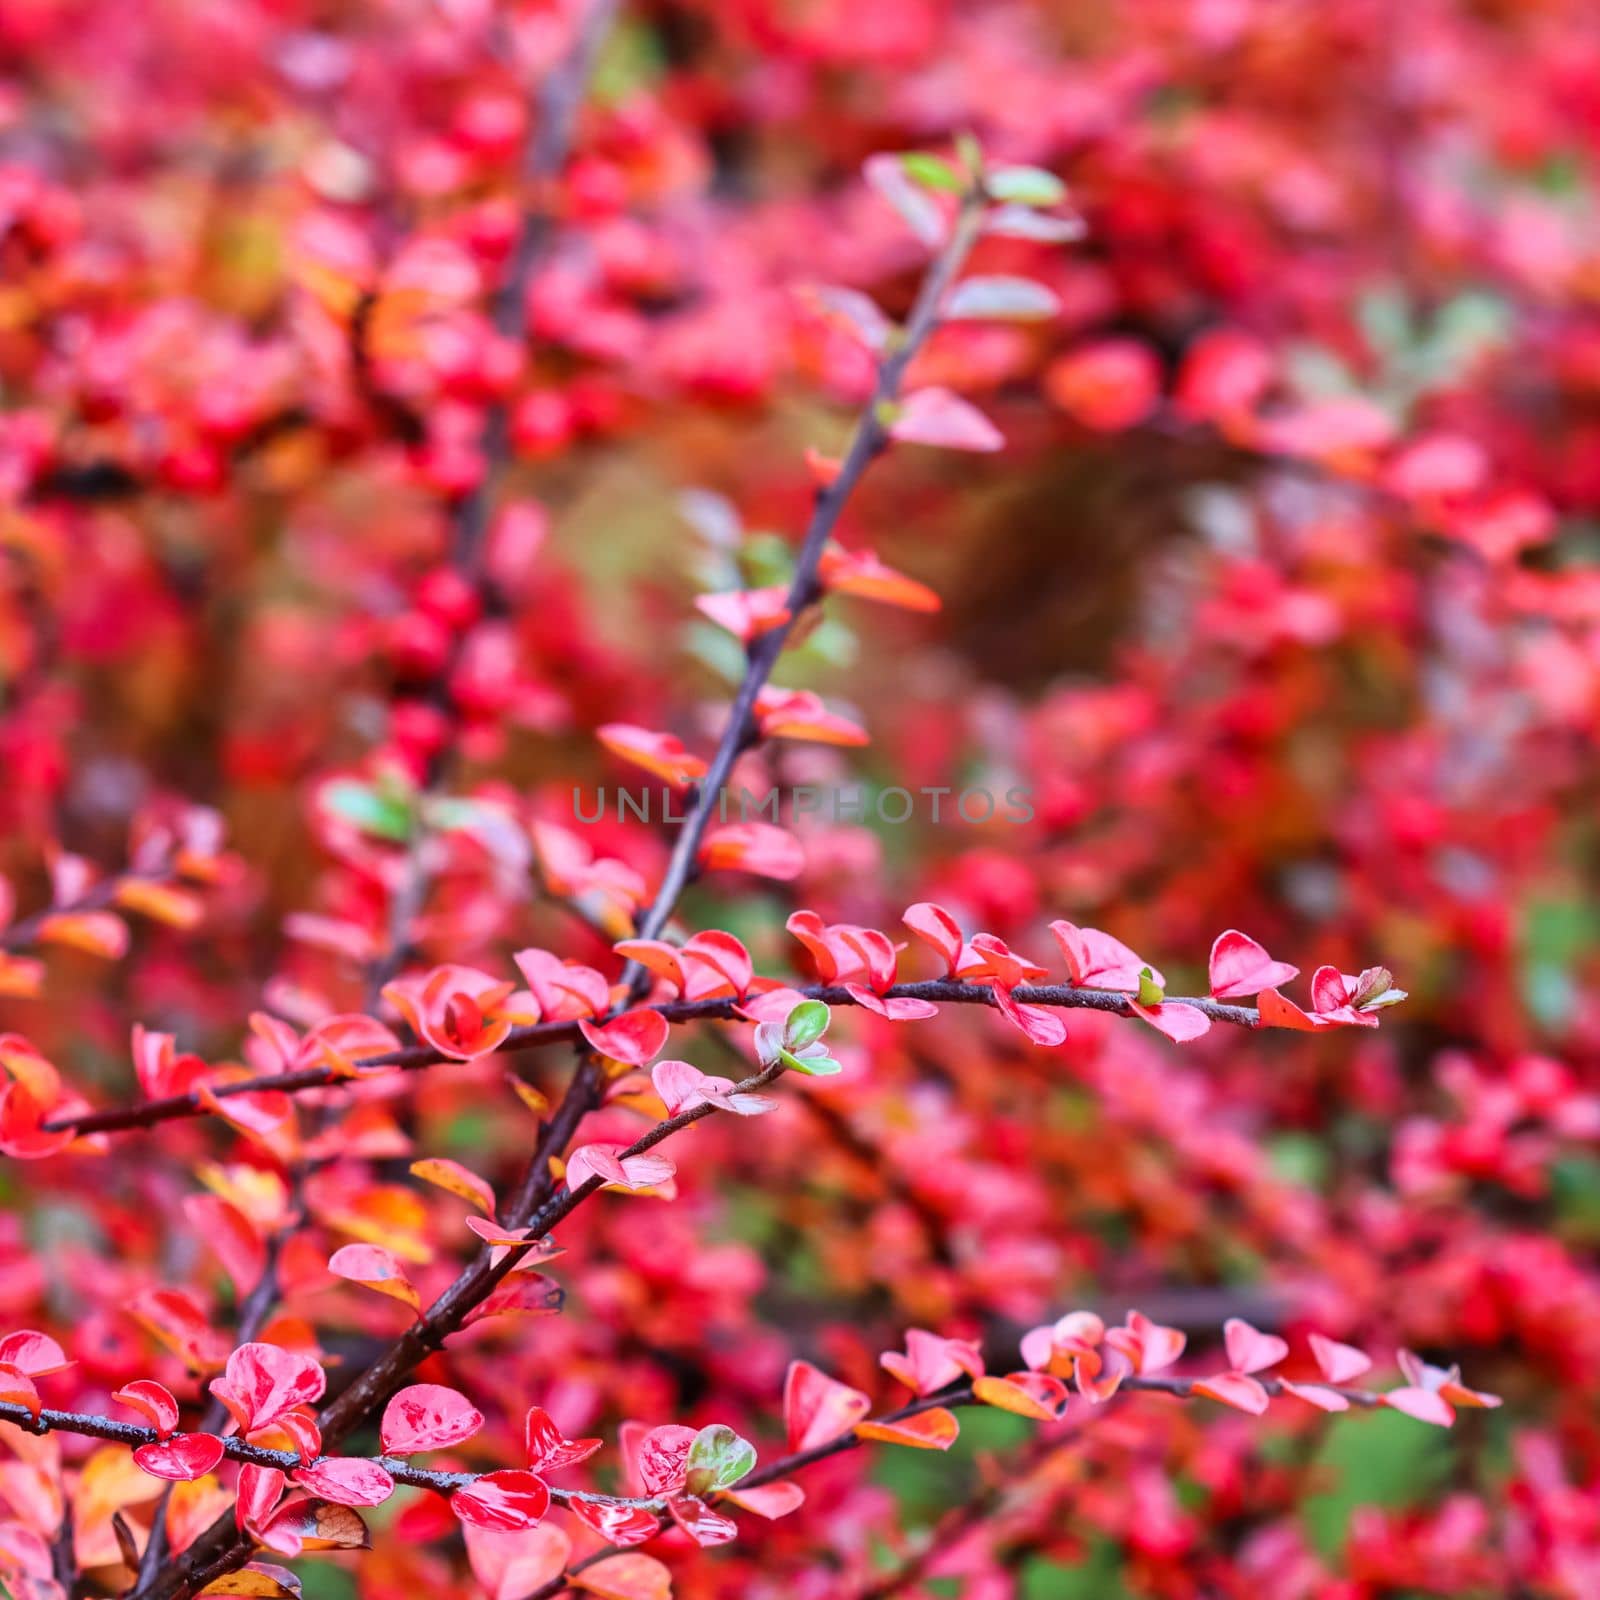 Blurred autumn background. Red leaves and fruits on the cotoneaster horizontalis branches